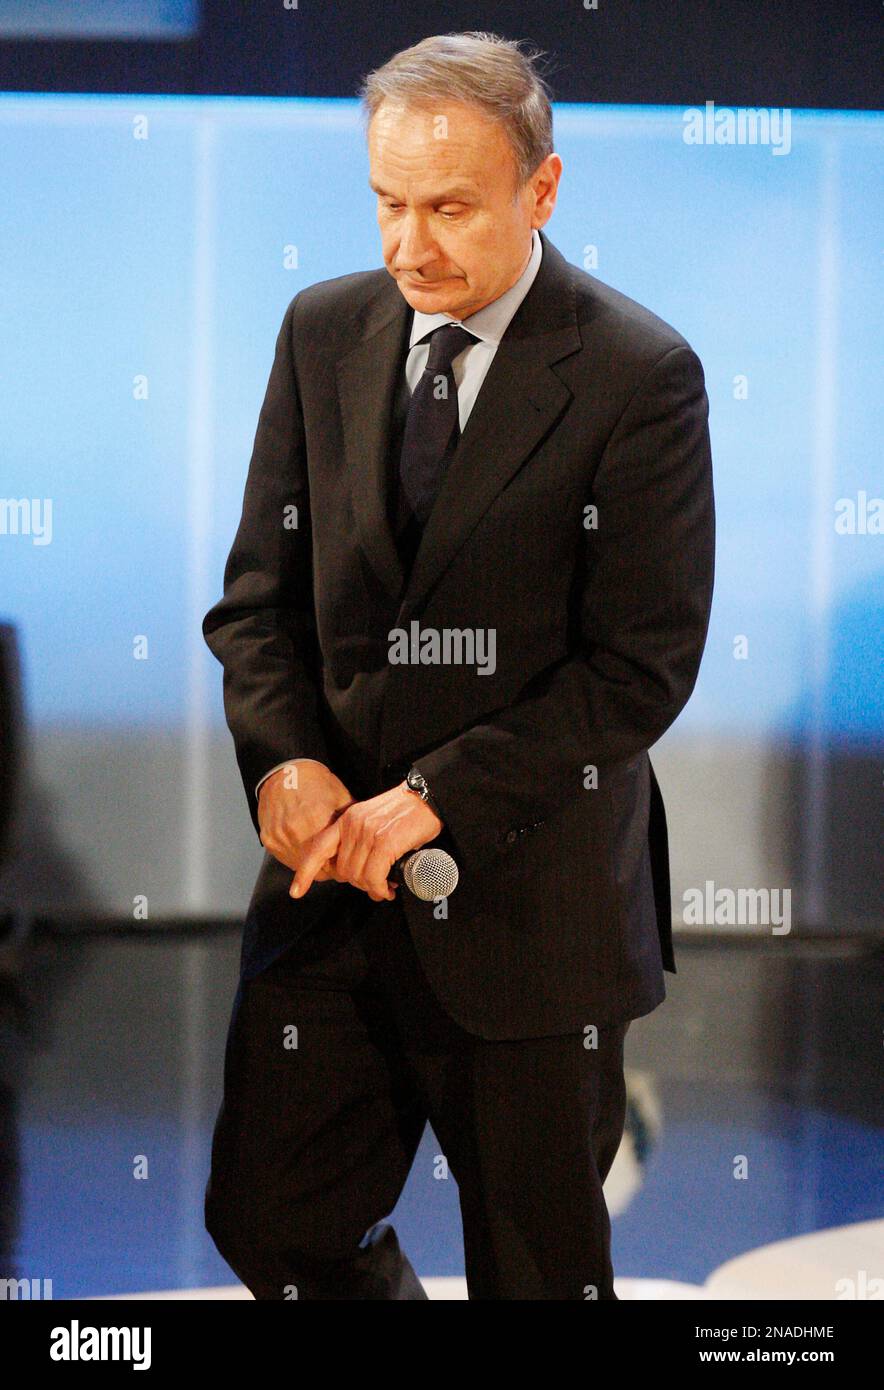 CONI President Gianni Petrucci stands during the "Gran Gala' del calcio" show, where the best Serie A players are selected, in Milan, Italy, Monday, Jan. 23, 2012. (AP Photo/Antonio Calanni) Stock Photo